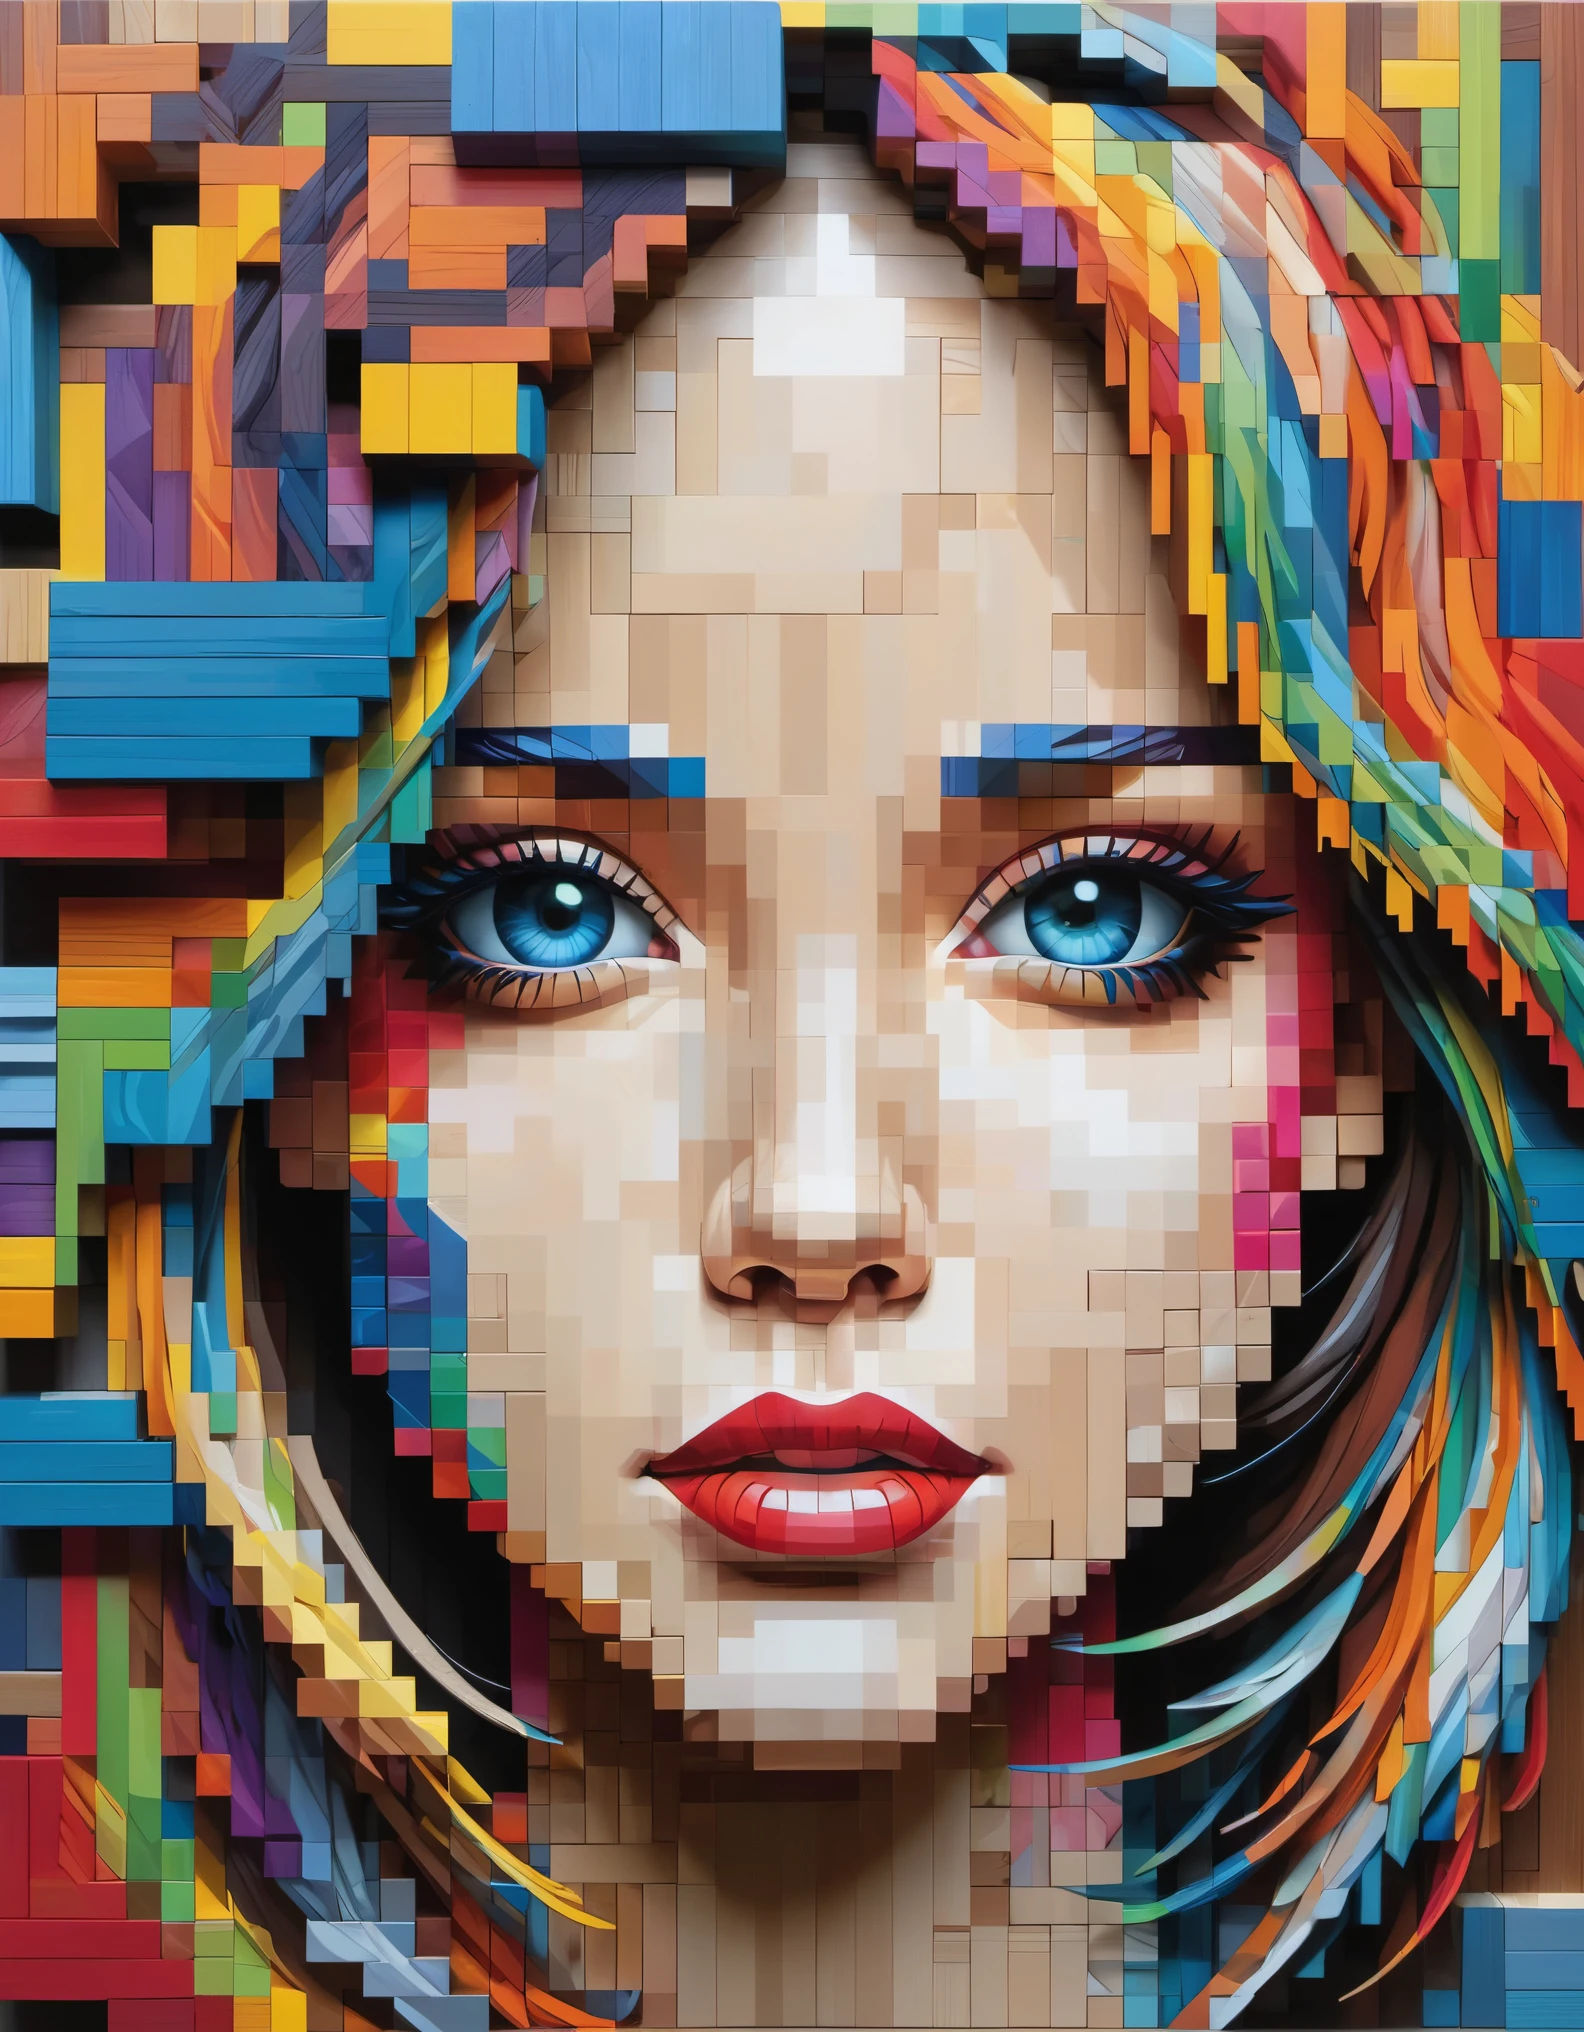 pixel art，Australian artist Gil Bruvel uses colorful wooden blocks to create three-dimensional pixelated portraits of girls